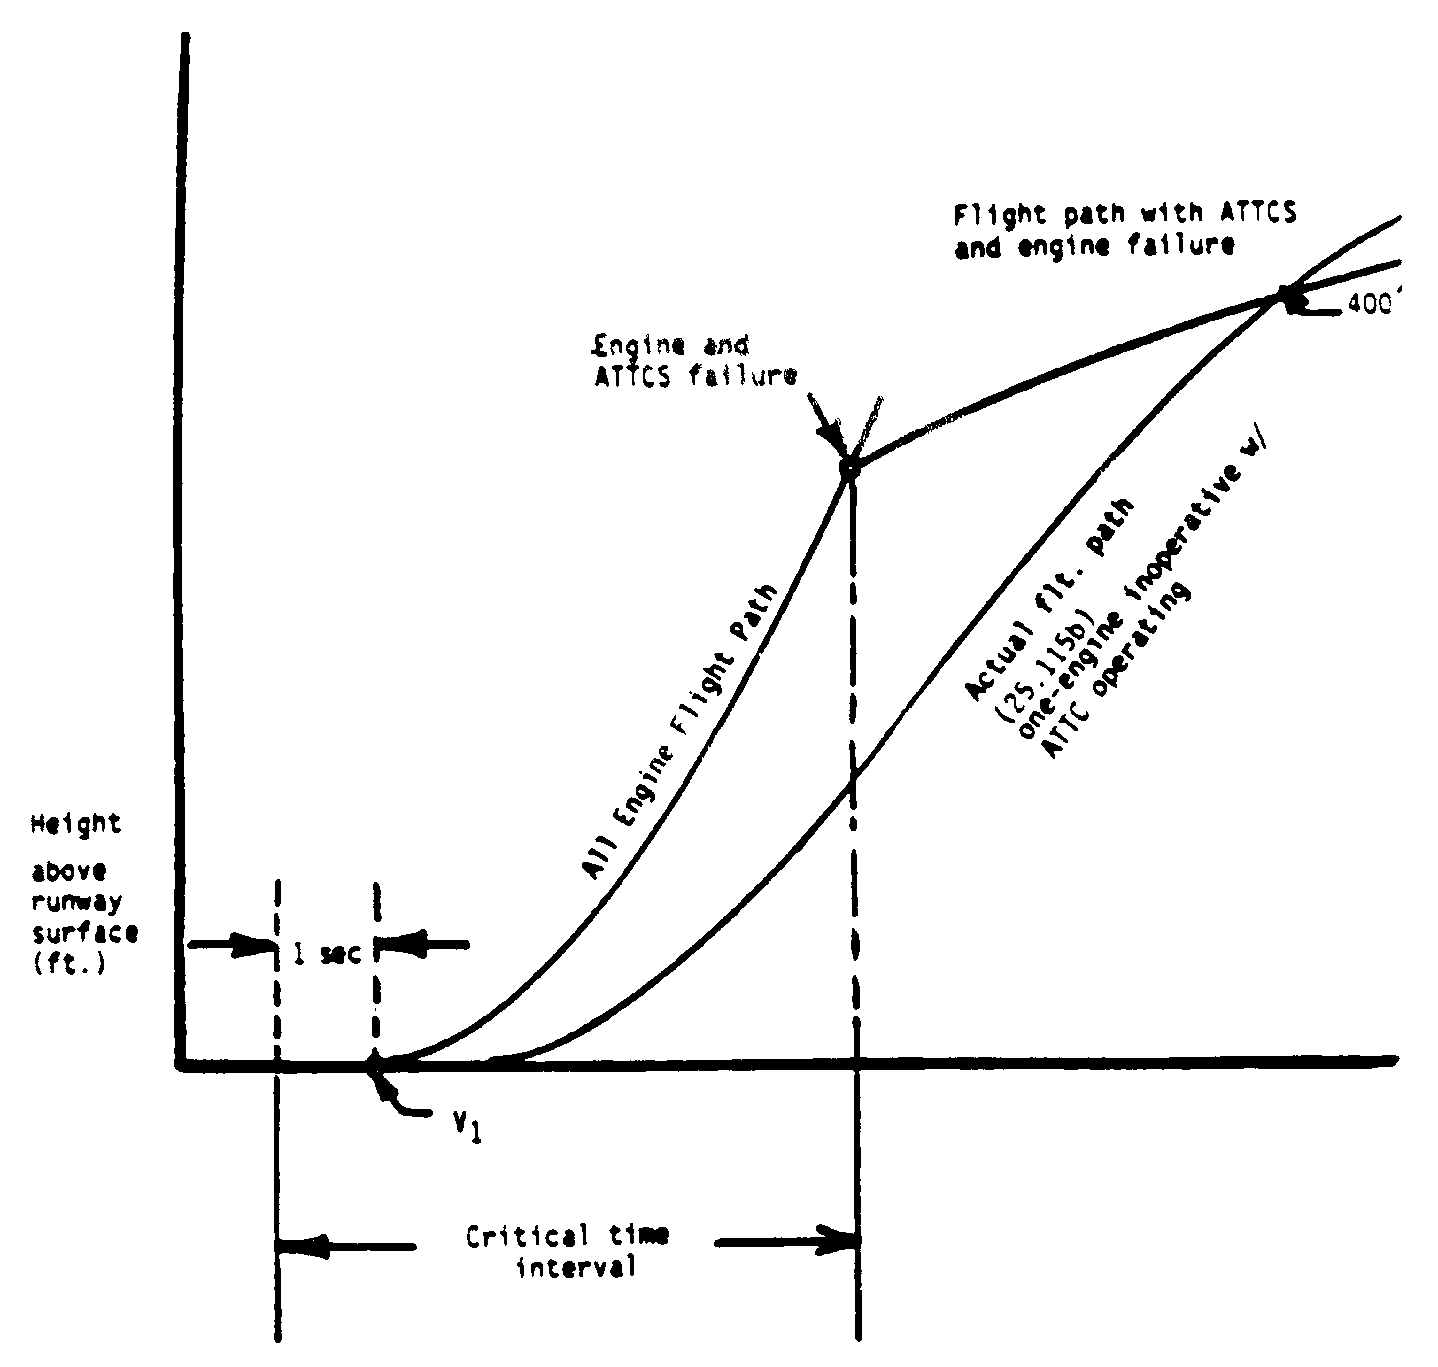 Graphic of (b) Critical Time Interval. When conducting an ATTCS takeoff, the critical time interval is between V1 minus 1 second and a point on the minimum performance, all-engine flight path where, assuming a simultaneous occurrence of an engine and ATTCS failure, the resulting minimum flight path thereafter intersects the Part 25 required actual flight path at no less than 400 feet above the takeoff surface. This time interval is shown in the following illustration